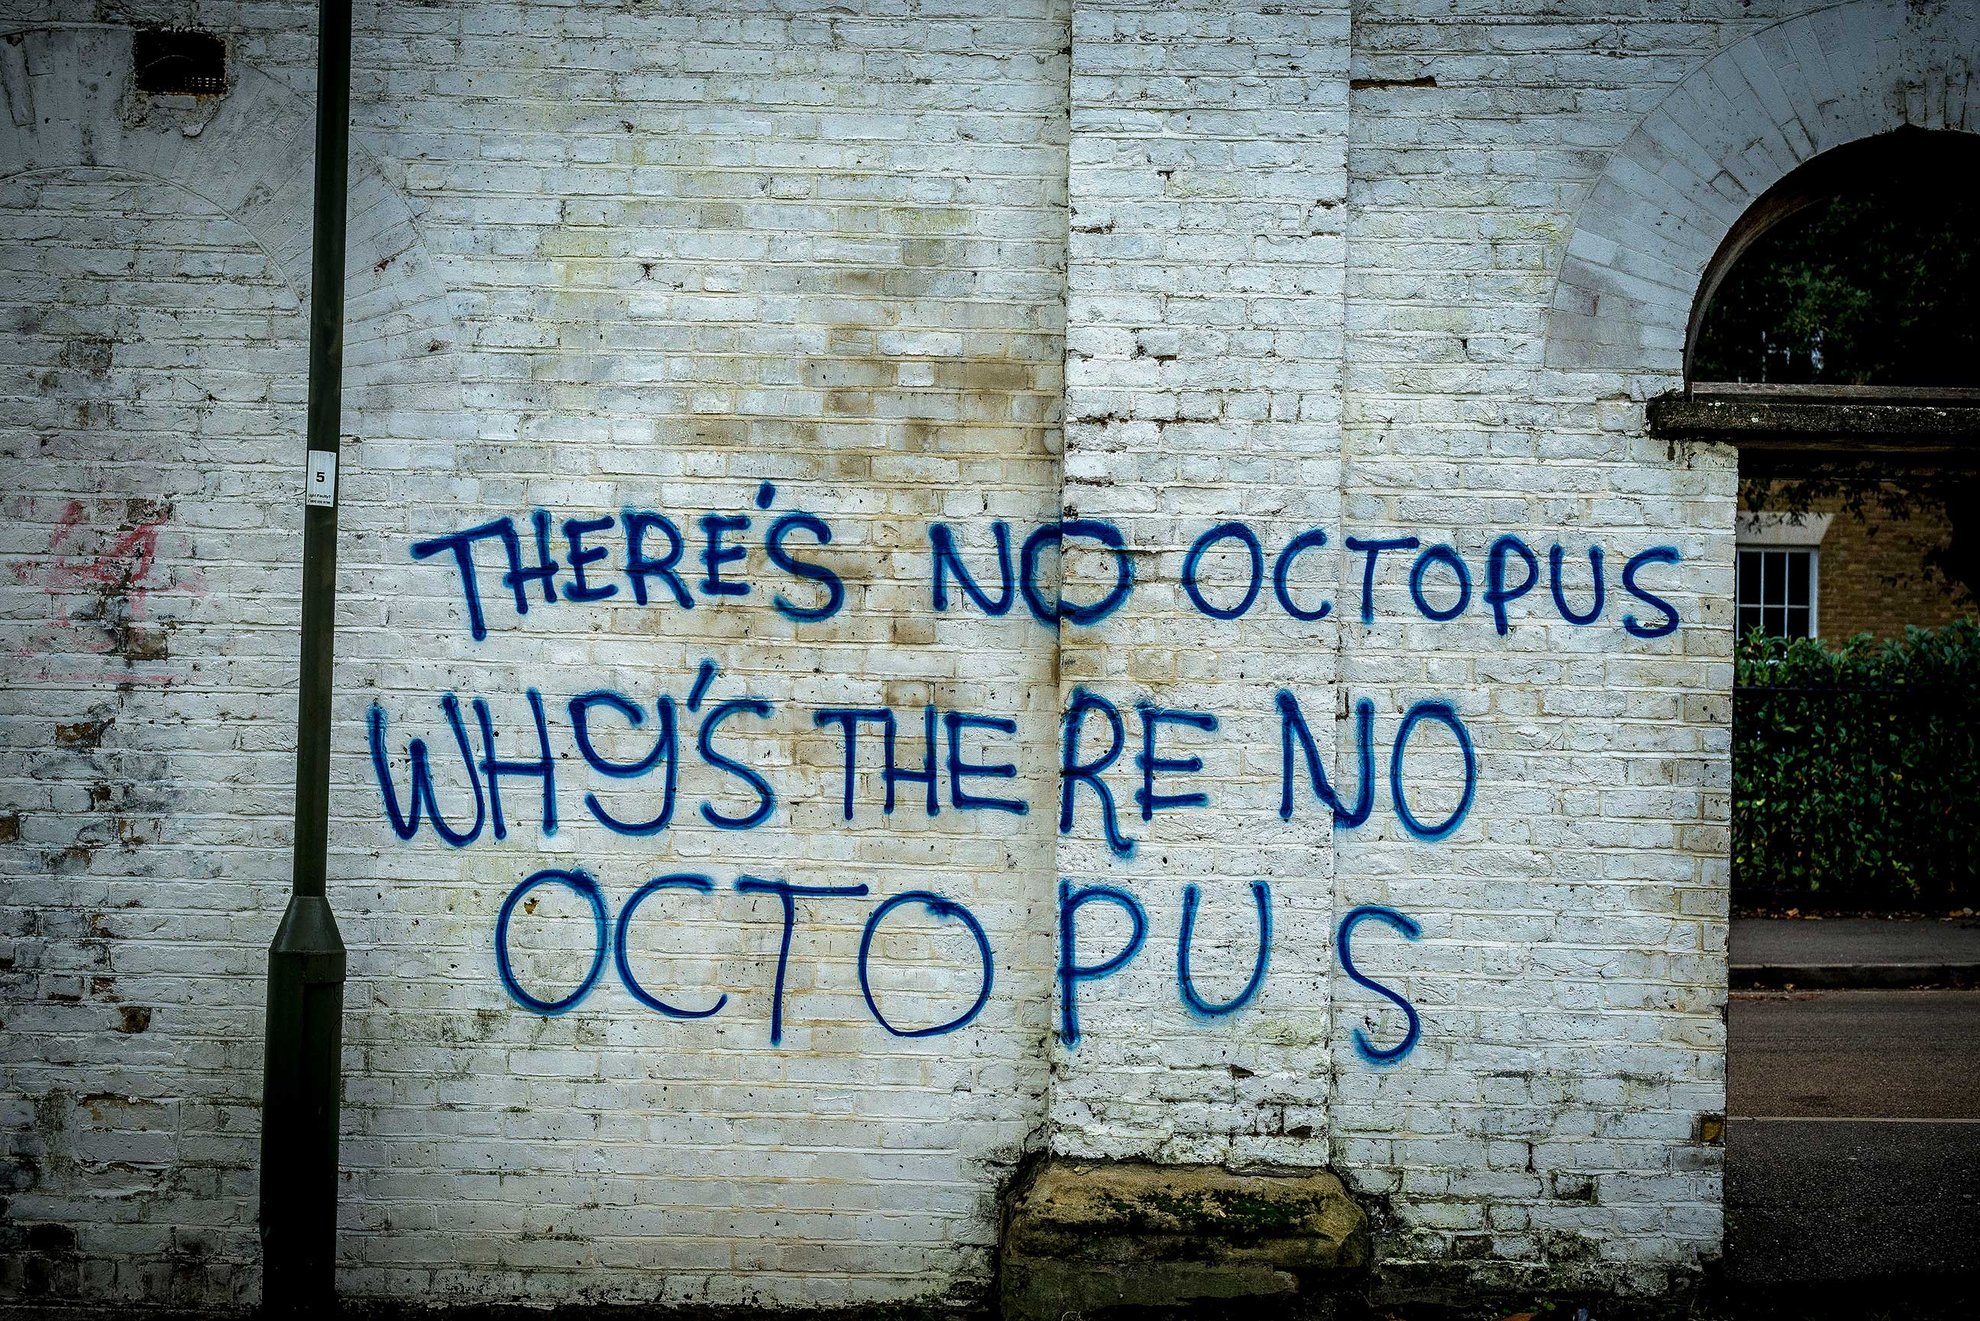 There’s No Octopus. Why’s There No Octopus?